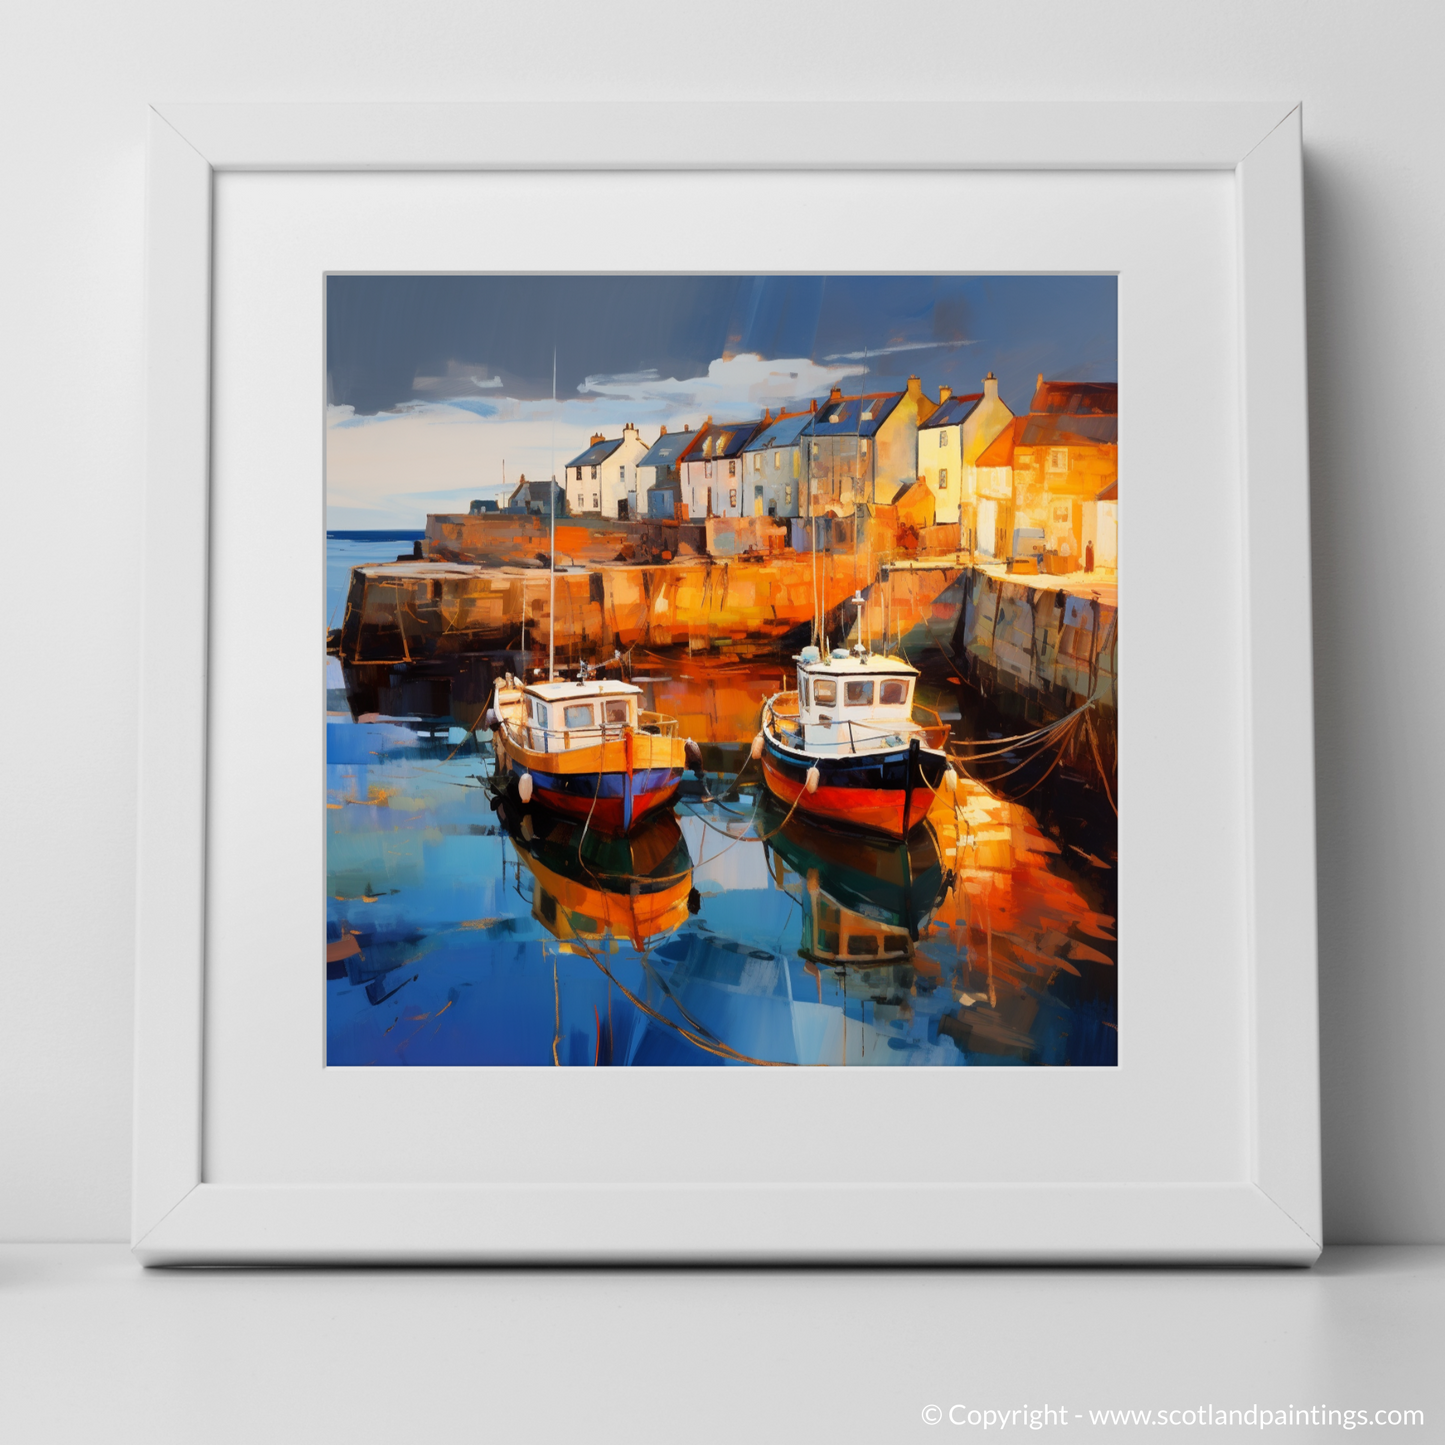 Art Print of Pittenweem Harbour at dusk with a white frame